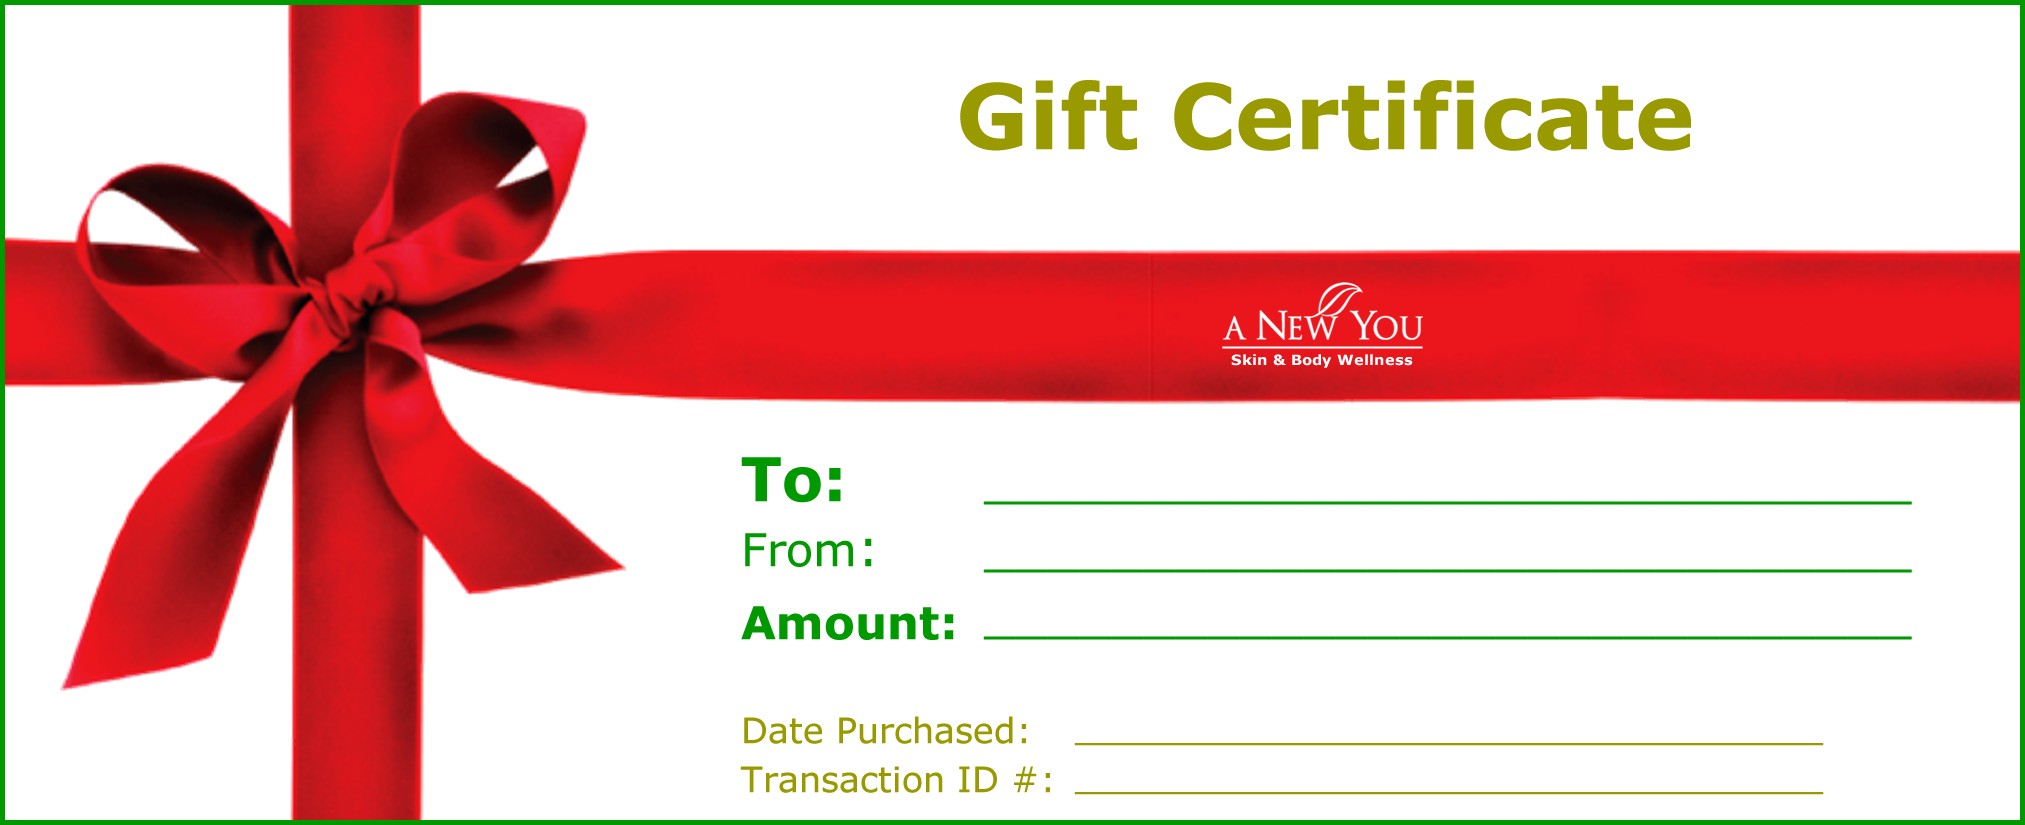 gift-certificate-pdf-form-get-online-blank-to-fill-out